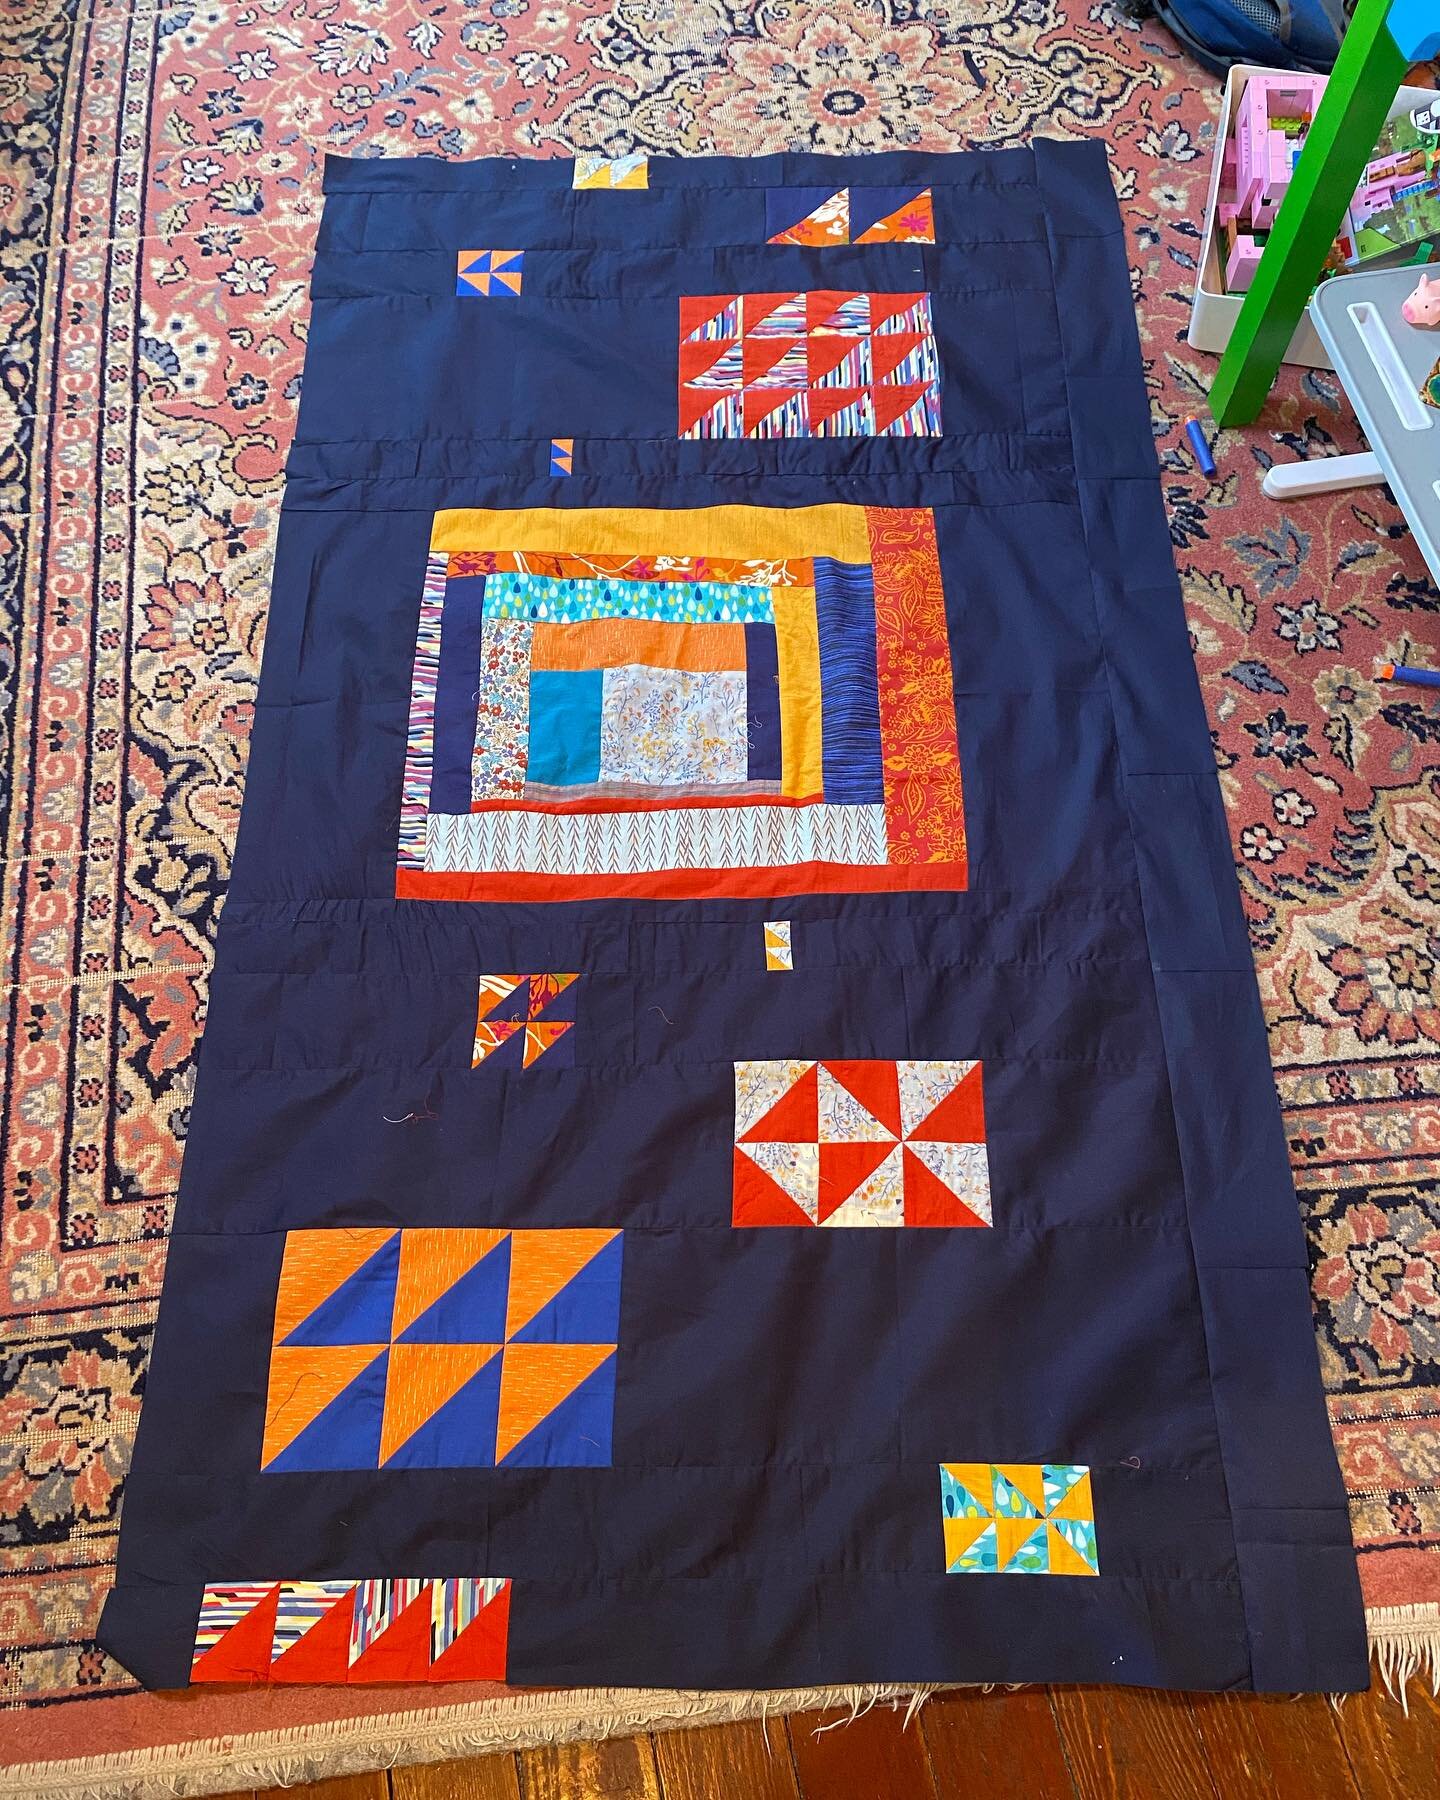 Messy deconstructed modern improv quilt (I need to get my sewing machine serviced). Feels good to make progress on a project that&rsquo;s been stalled for months. Letting go of any perfectionism and just enjoying the process.